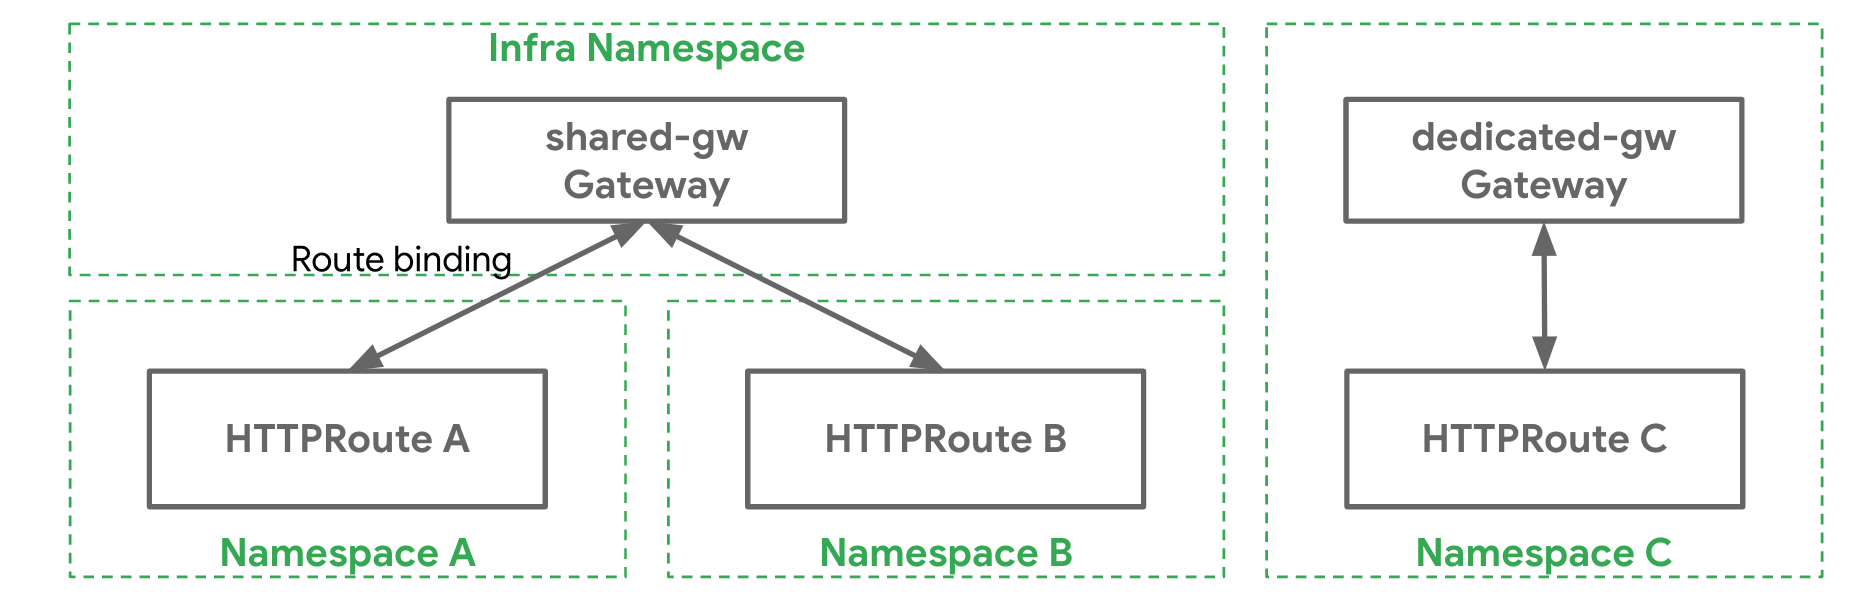 How Routes bind with Gateways